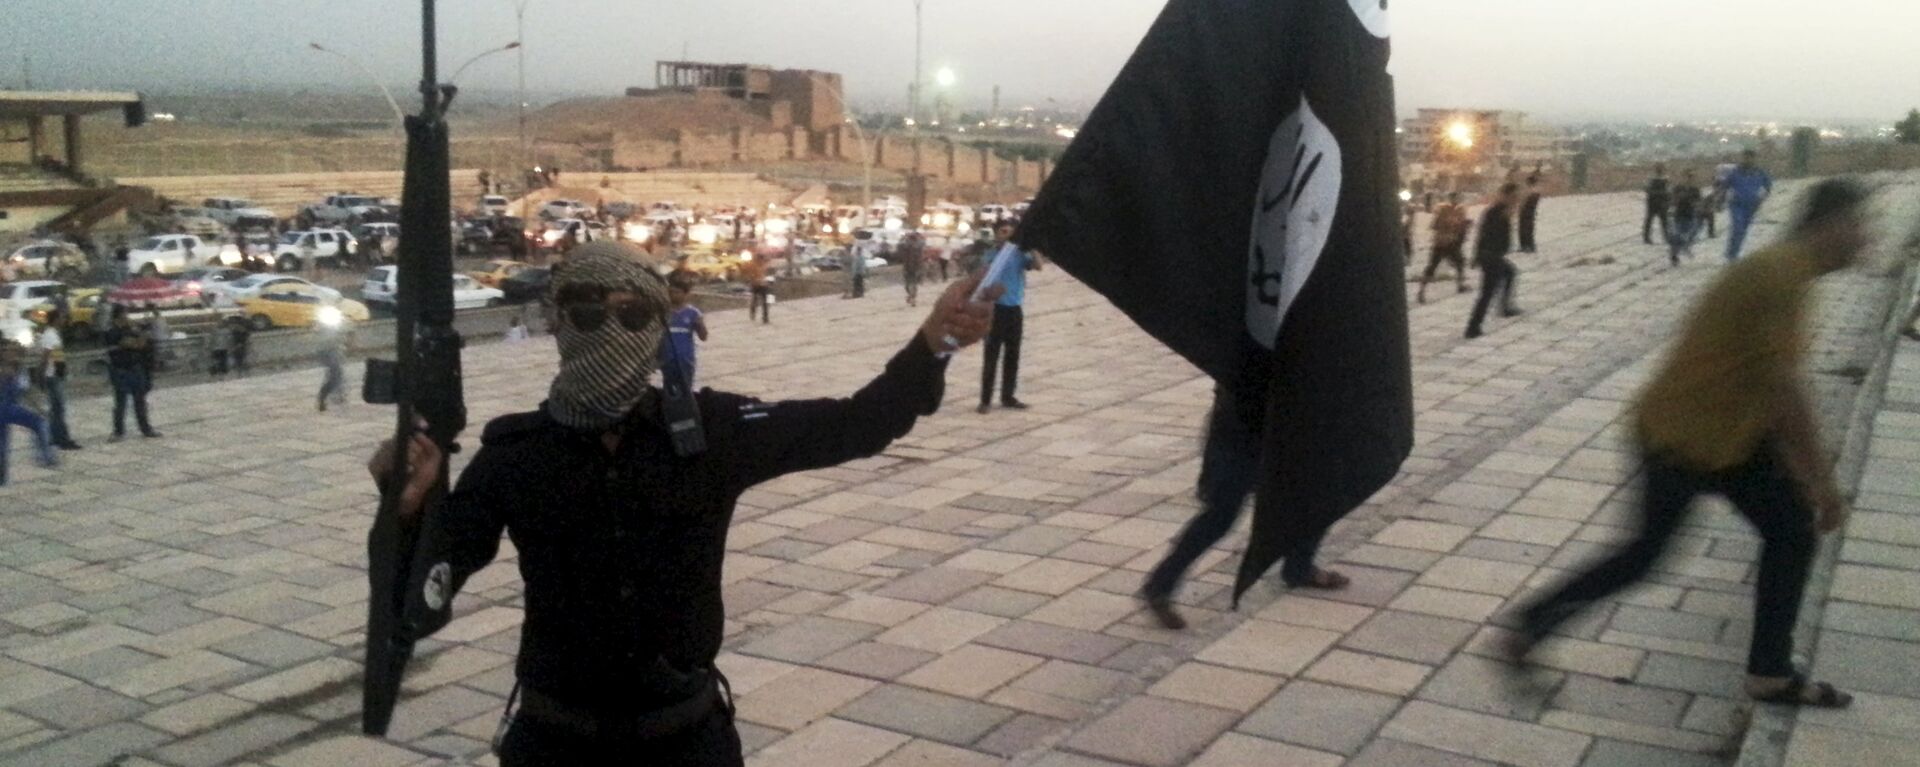 A fighter of Daesh holds an ISIL flag and a weapon on a street in the city of Mosul, Iraq, in this June 23, 2014. - Sputnik Moldova-România, 1920, 21.08.2021